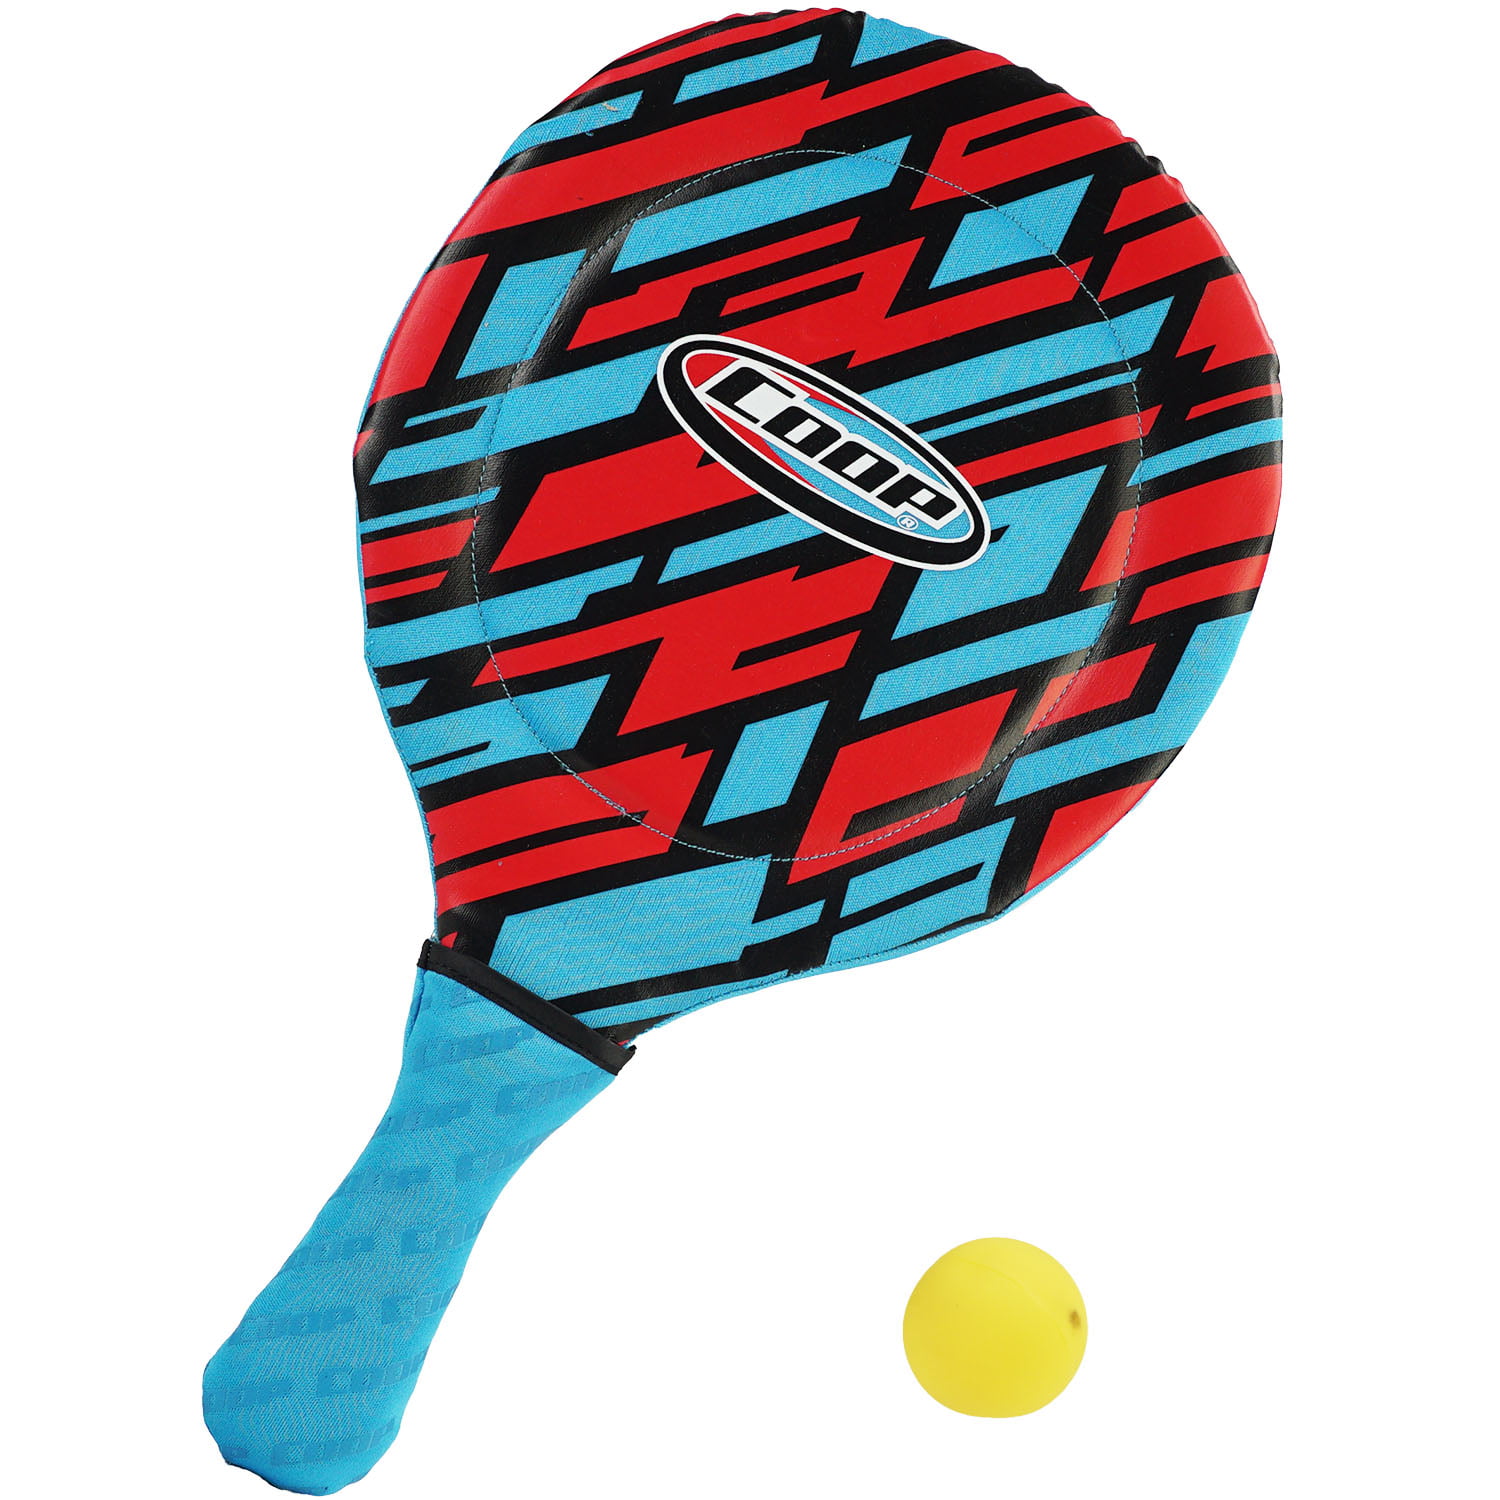 COOP HYDRO SMASH WATER BEACH RACKETS NEW FREE US SHIPPING 